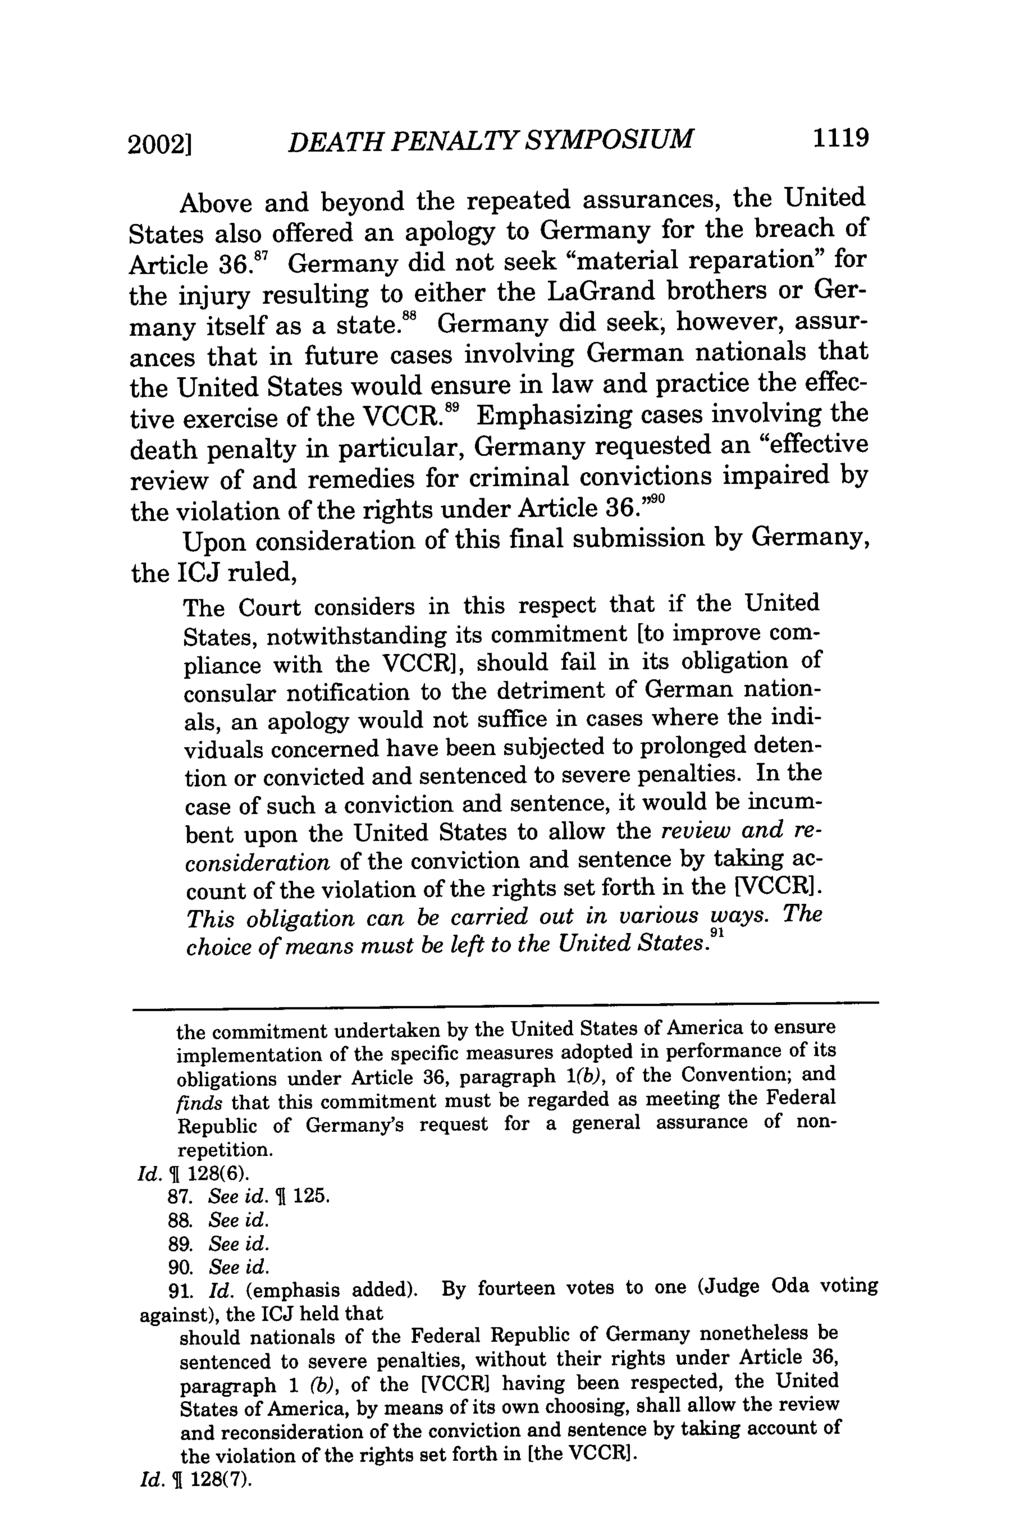 20021 DEATH PENALTY SYMPOSIUM 1119 Above and beyond the repeated assurances, the United States also offered an apology to Germany for the breach of Article 36.